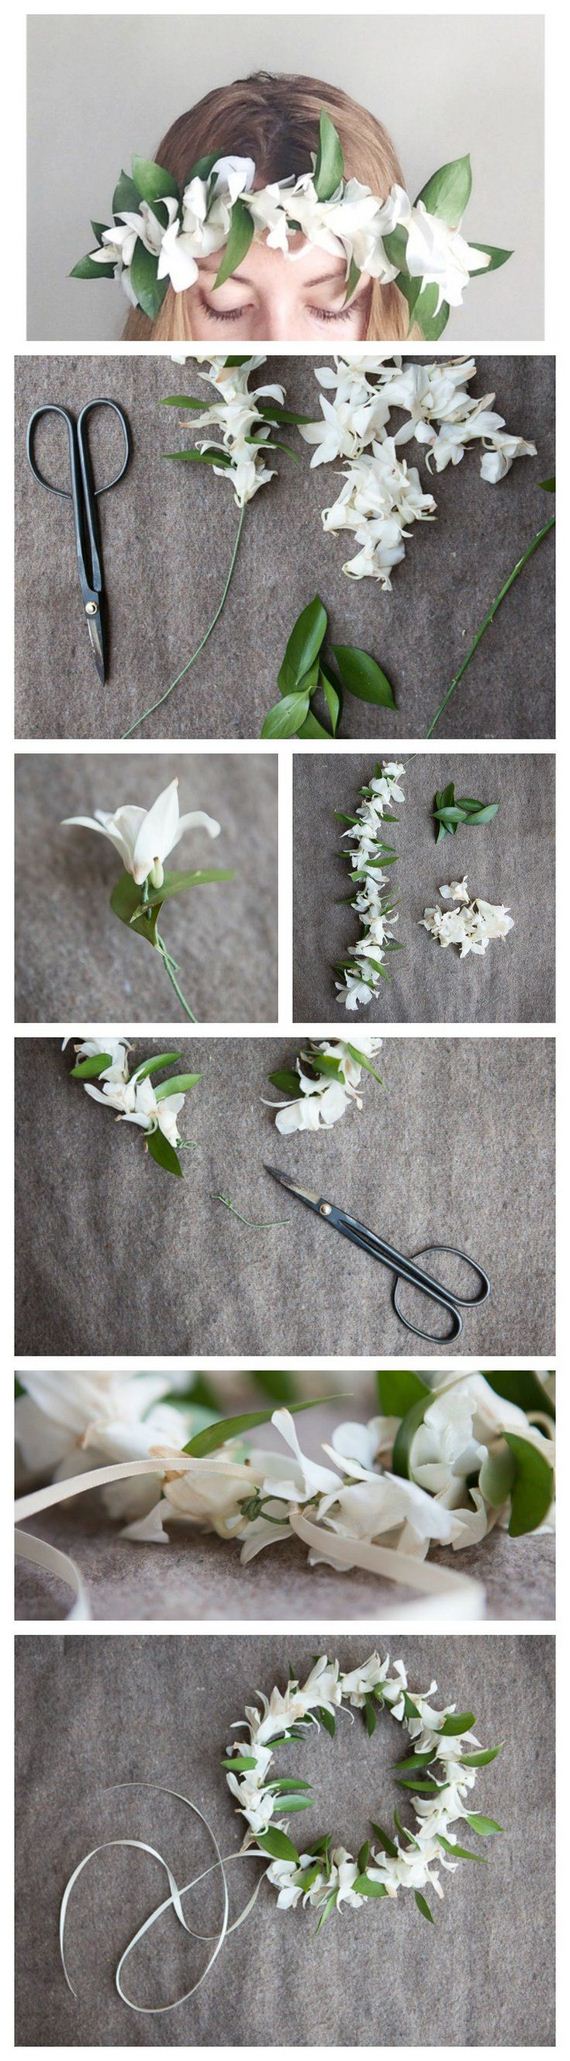 05-how-to-make-a-flower-crown-hairband-diy